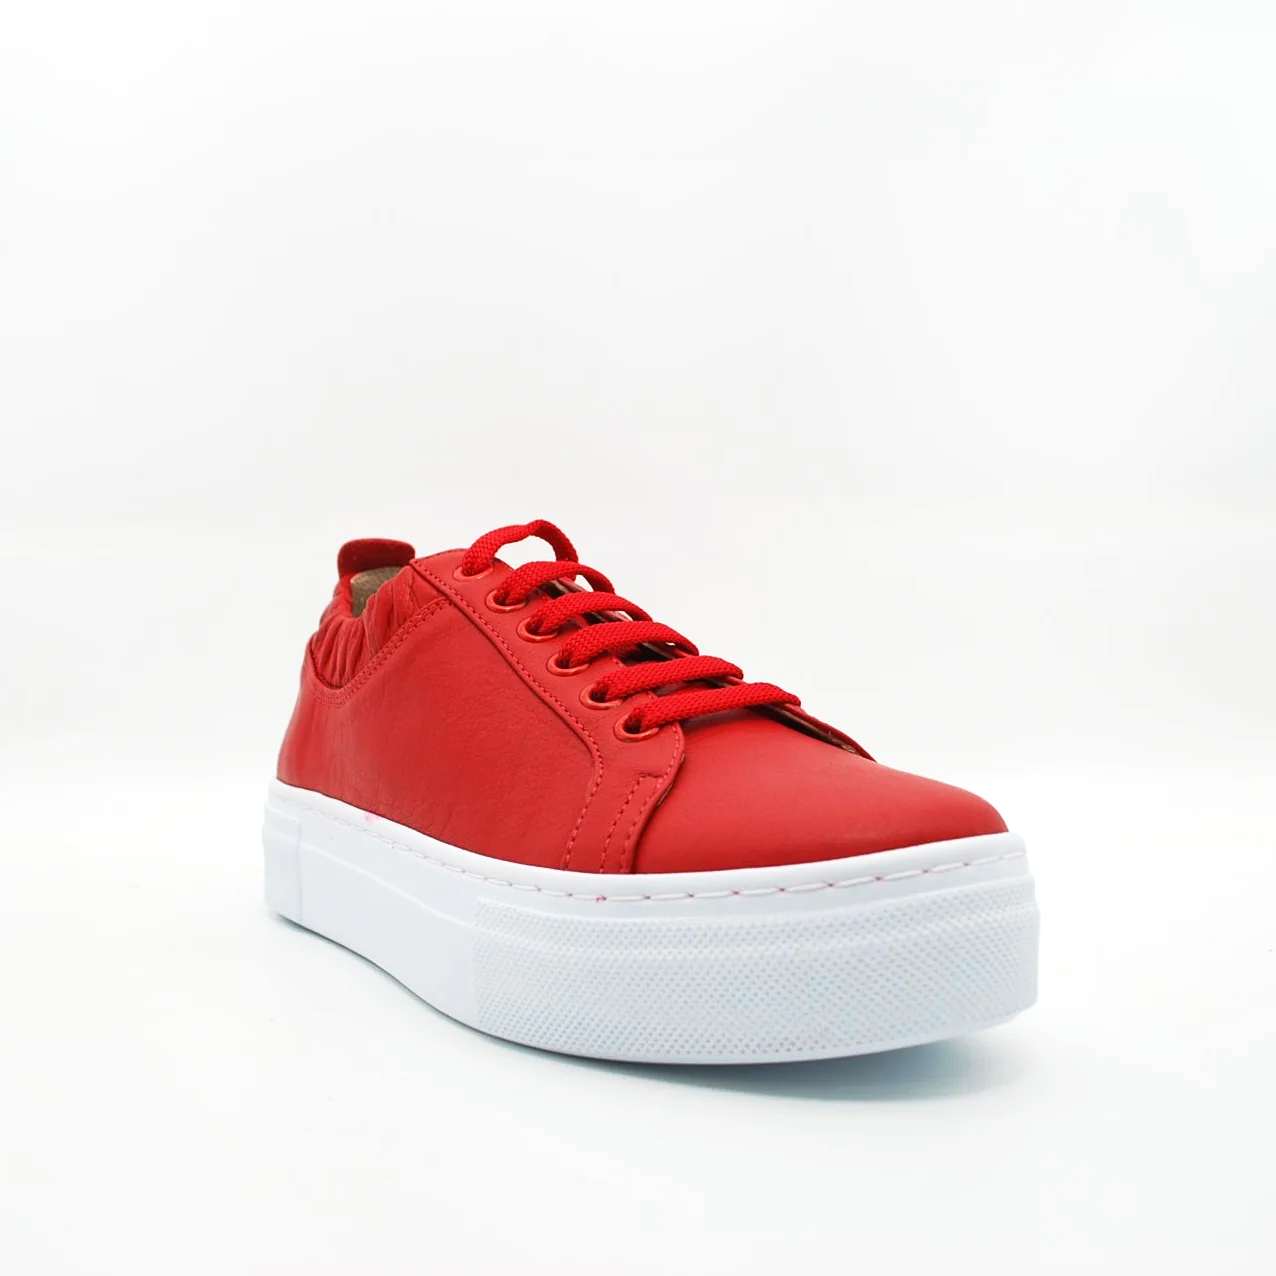 sneakers-wave-in-pelle-sneakers-2_c7205e58-3697-4fd1-ac54-e354a8f06474.png